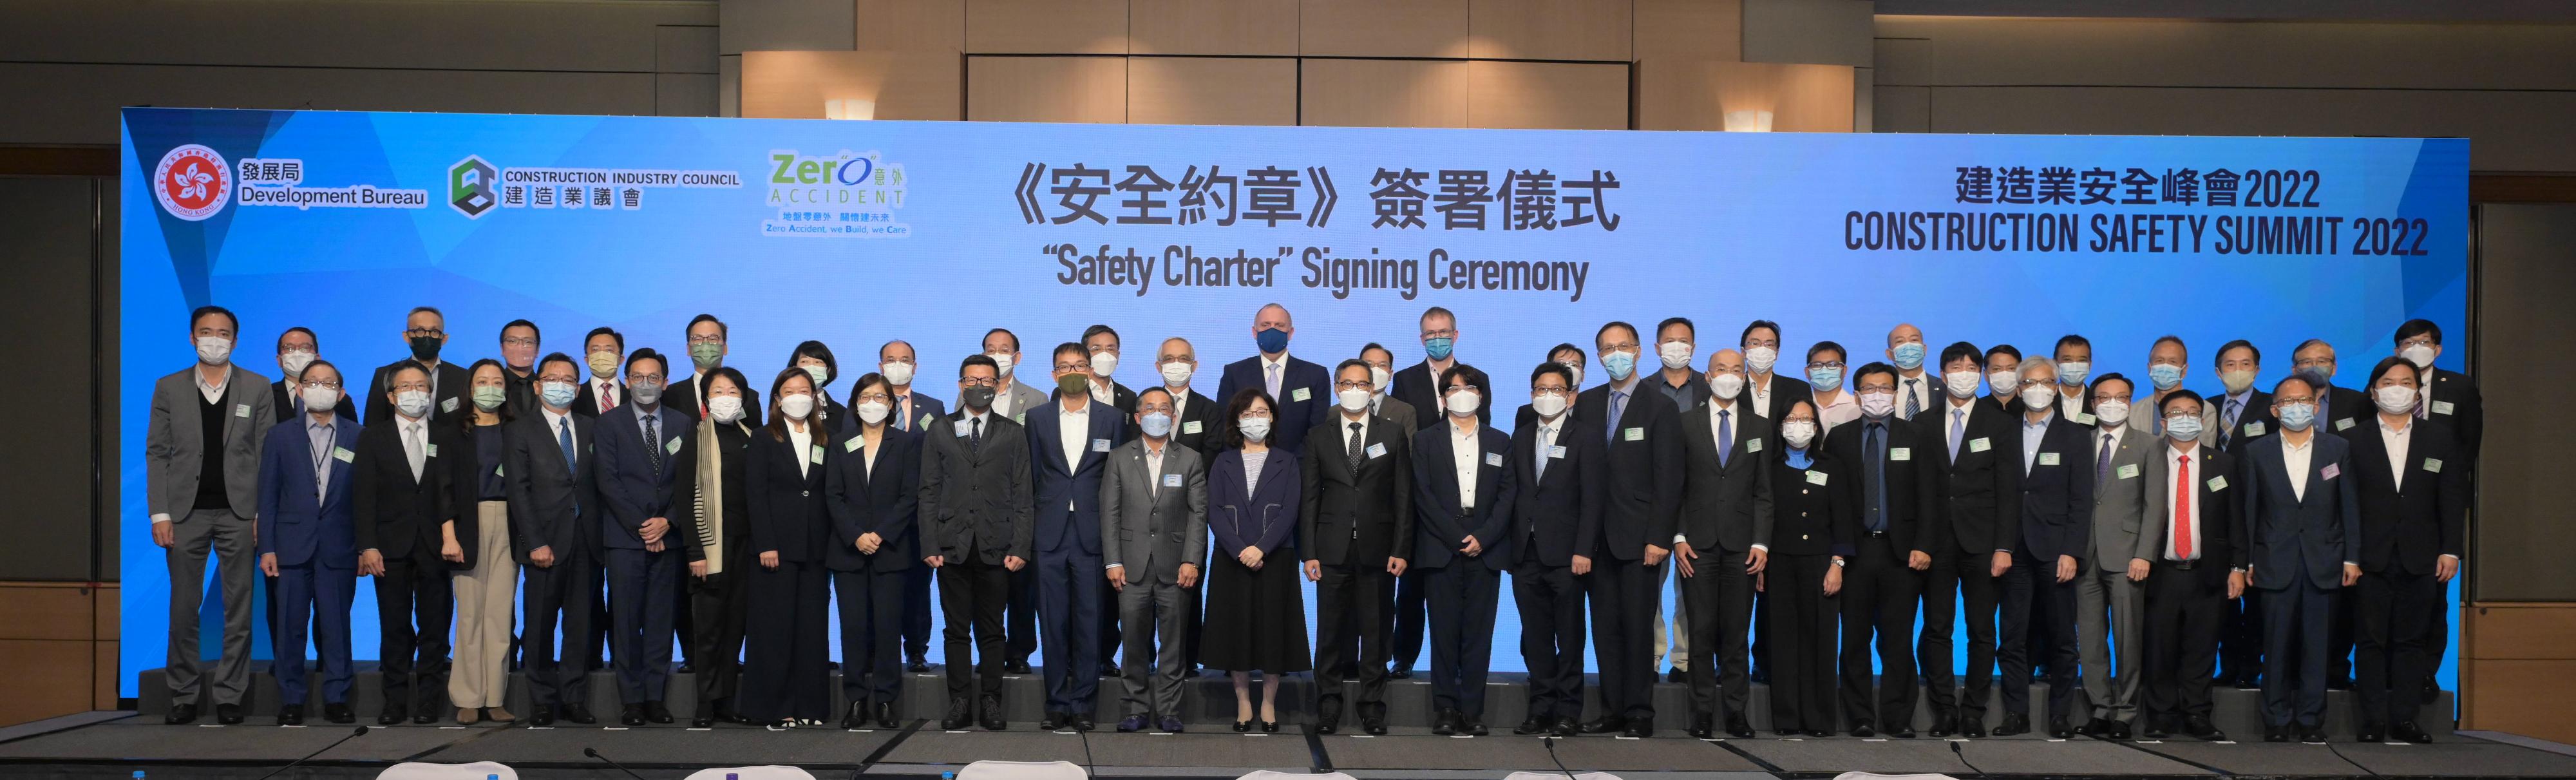 The Development Bureau and the Construction Industry Council (CIC) co-organised the Construction Safety Summit 2022 today (November 4). Photos shows the Secretary for Development, Ms Bernadette Linn (front row, 13th left); the Permanent Secretary for Development (Works), Mr Ricky Lau (front row, 13th right); the Chairman of the CIC, Mr Thomas Ho (front row, 12th left), and other guests at the "Safety Charter" signing ceremony.